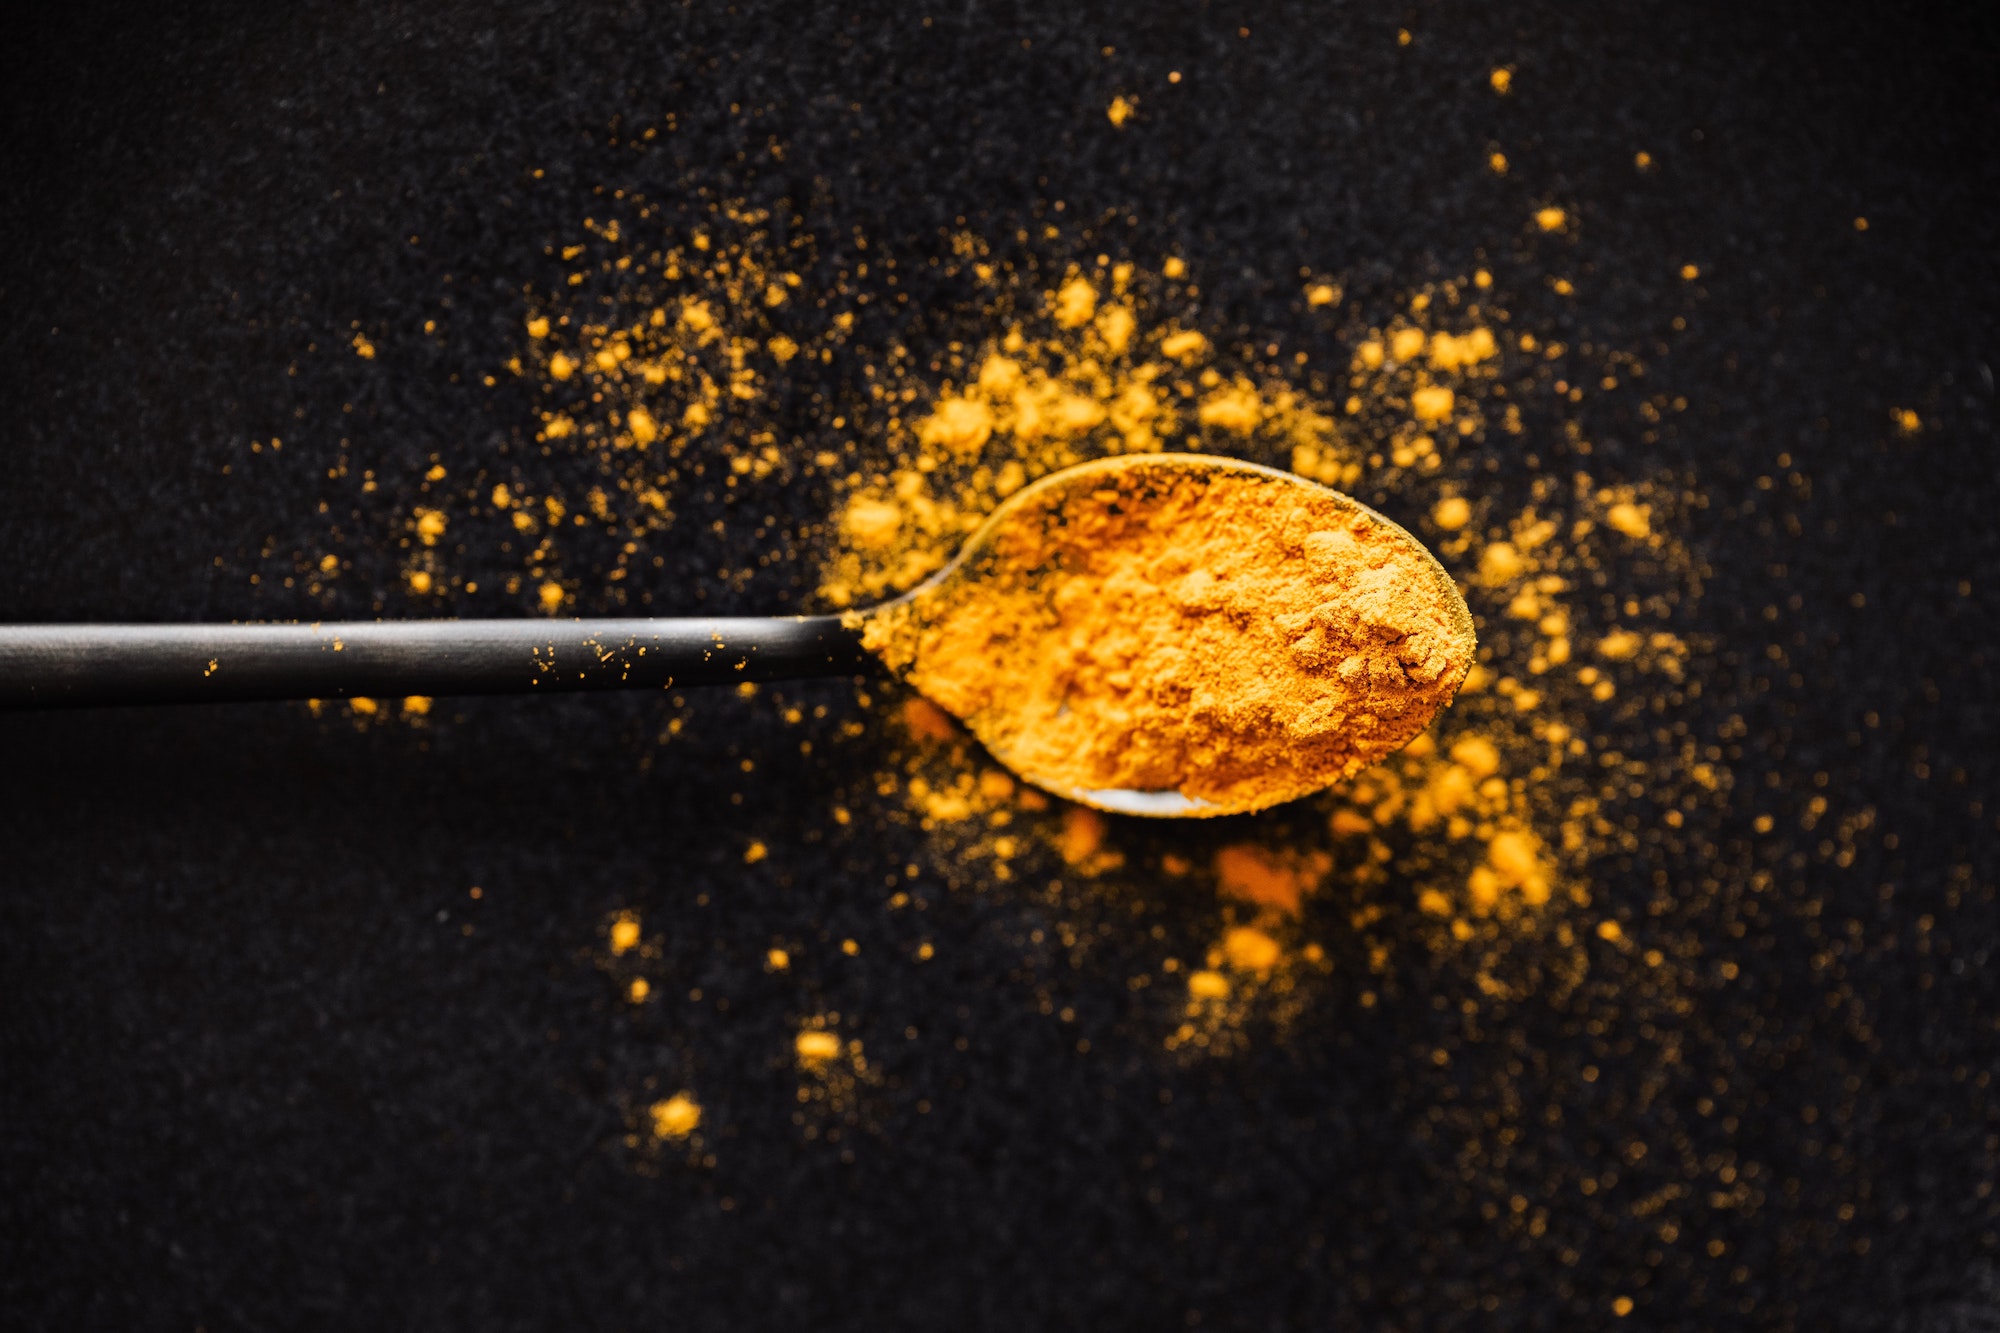 From fuchsia (acai) to imperial green (matcha), the culinary world now turns to turmeric's sunny yellow